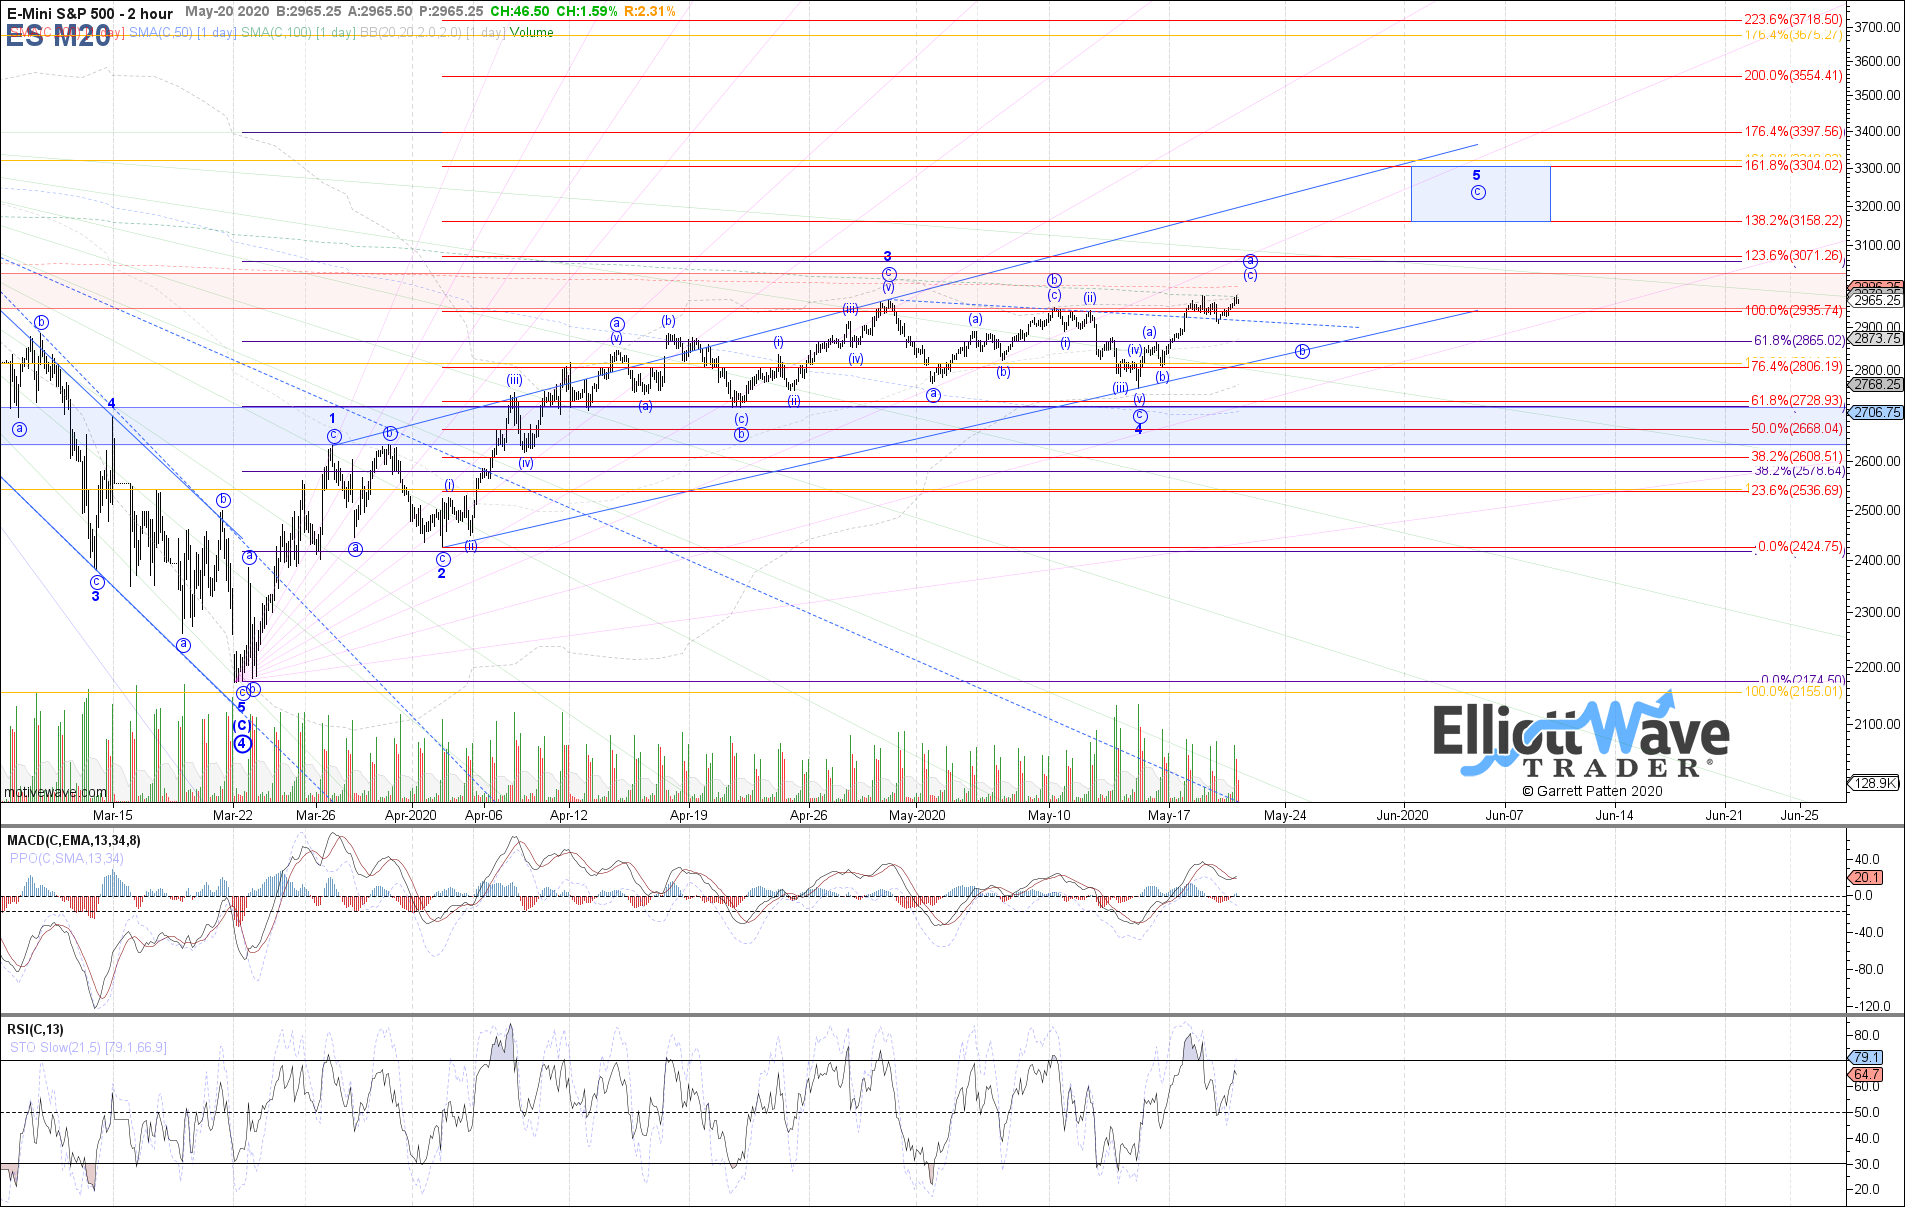 ES M20 - Micro - May-20 1108 AM (2 hour)